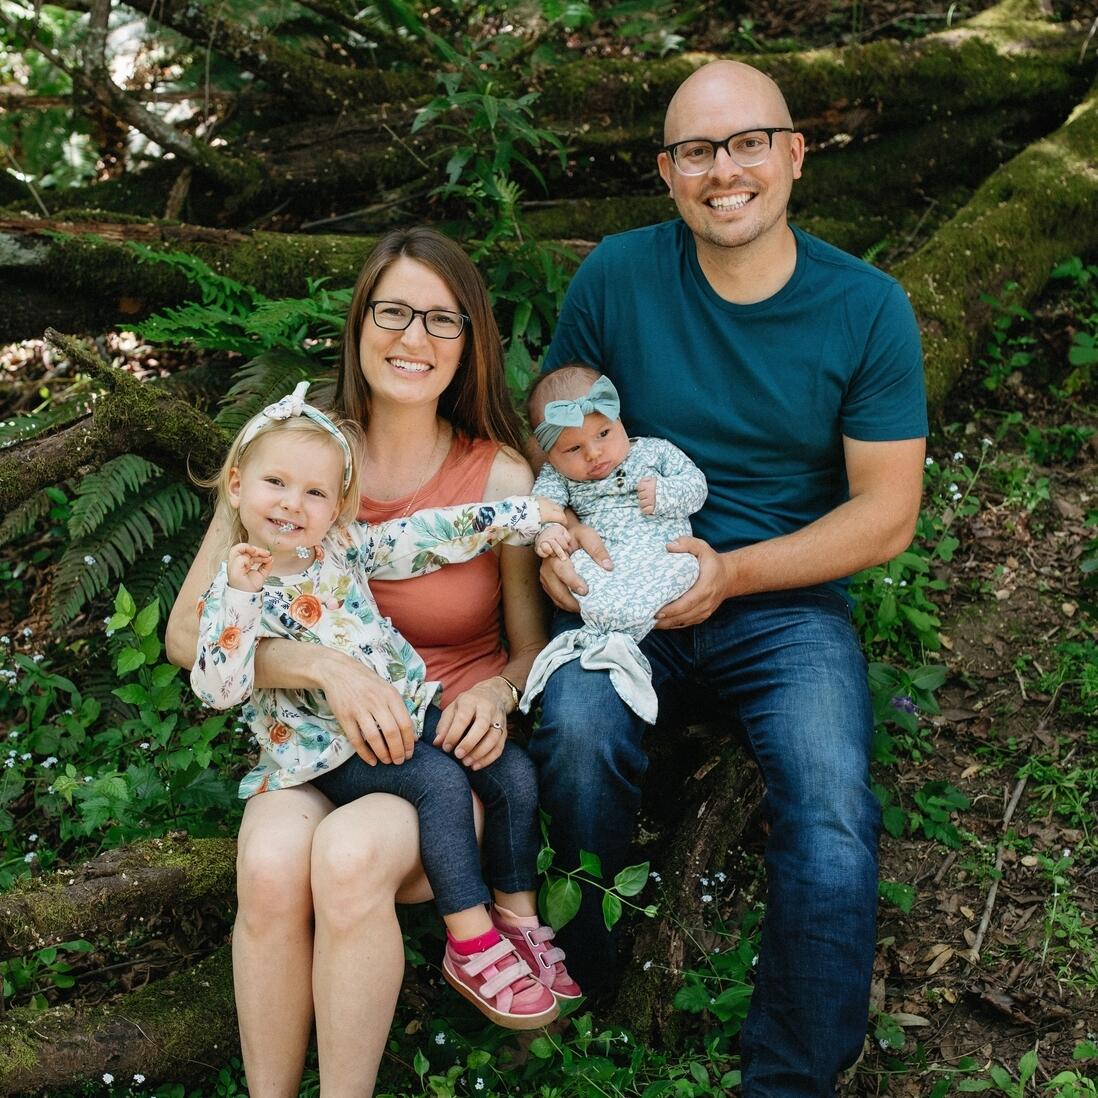 Outside of being a faculty member, Dr. Boyce spends most of her time with her husband and two little girls who are currently 2.5 years and 5 years old (2021).